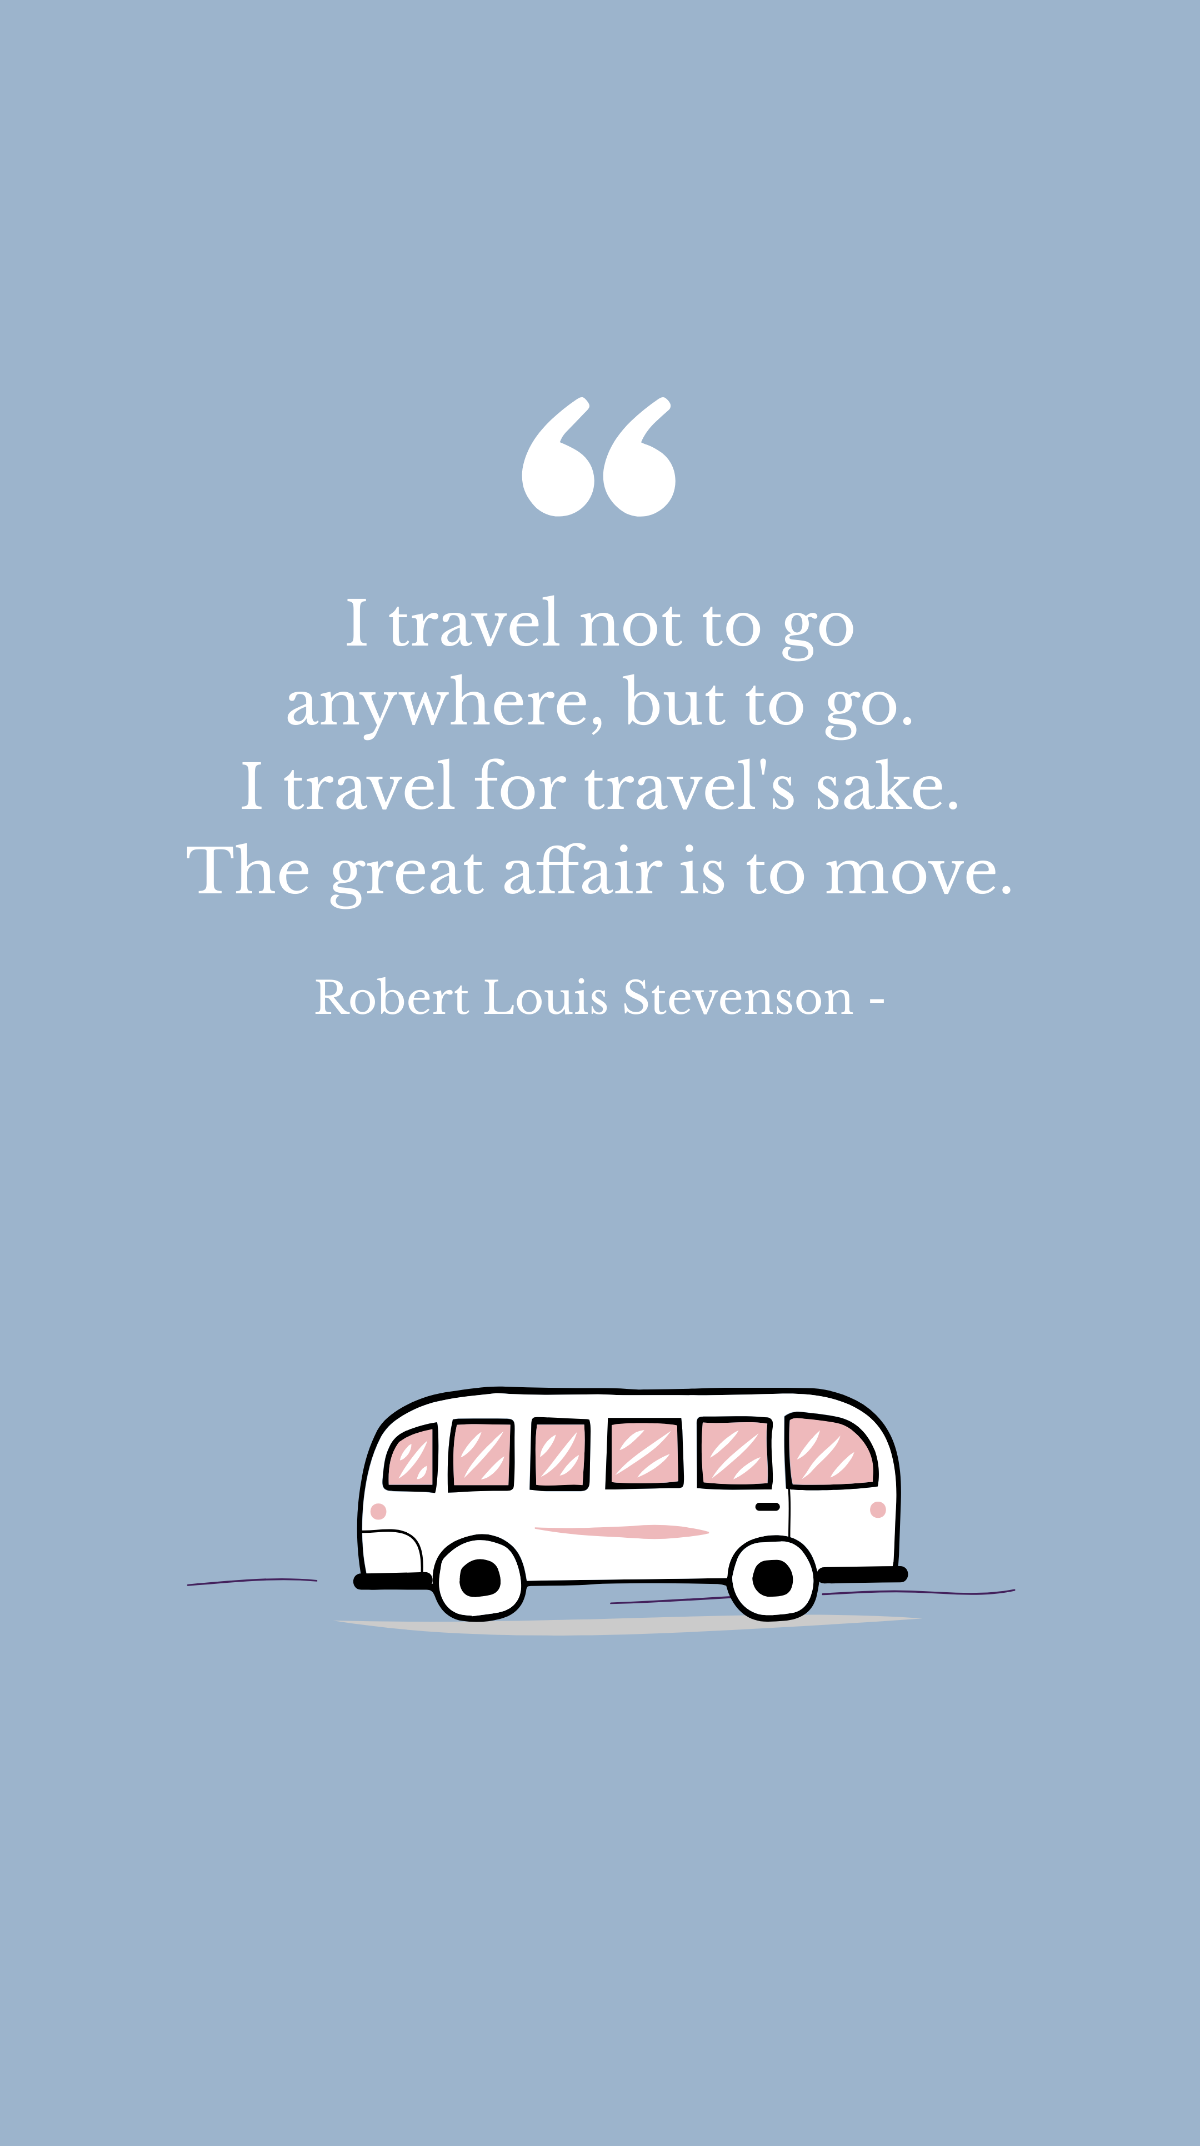 Robert Louis Stevenson - I travel not to go anywhere, but to go. I travel for travel's sake. The great affair is to move. Template